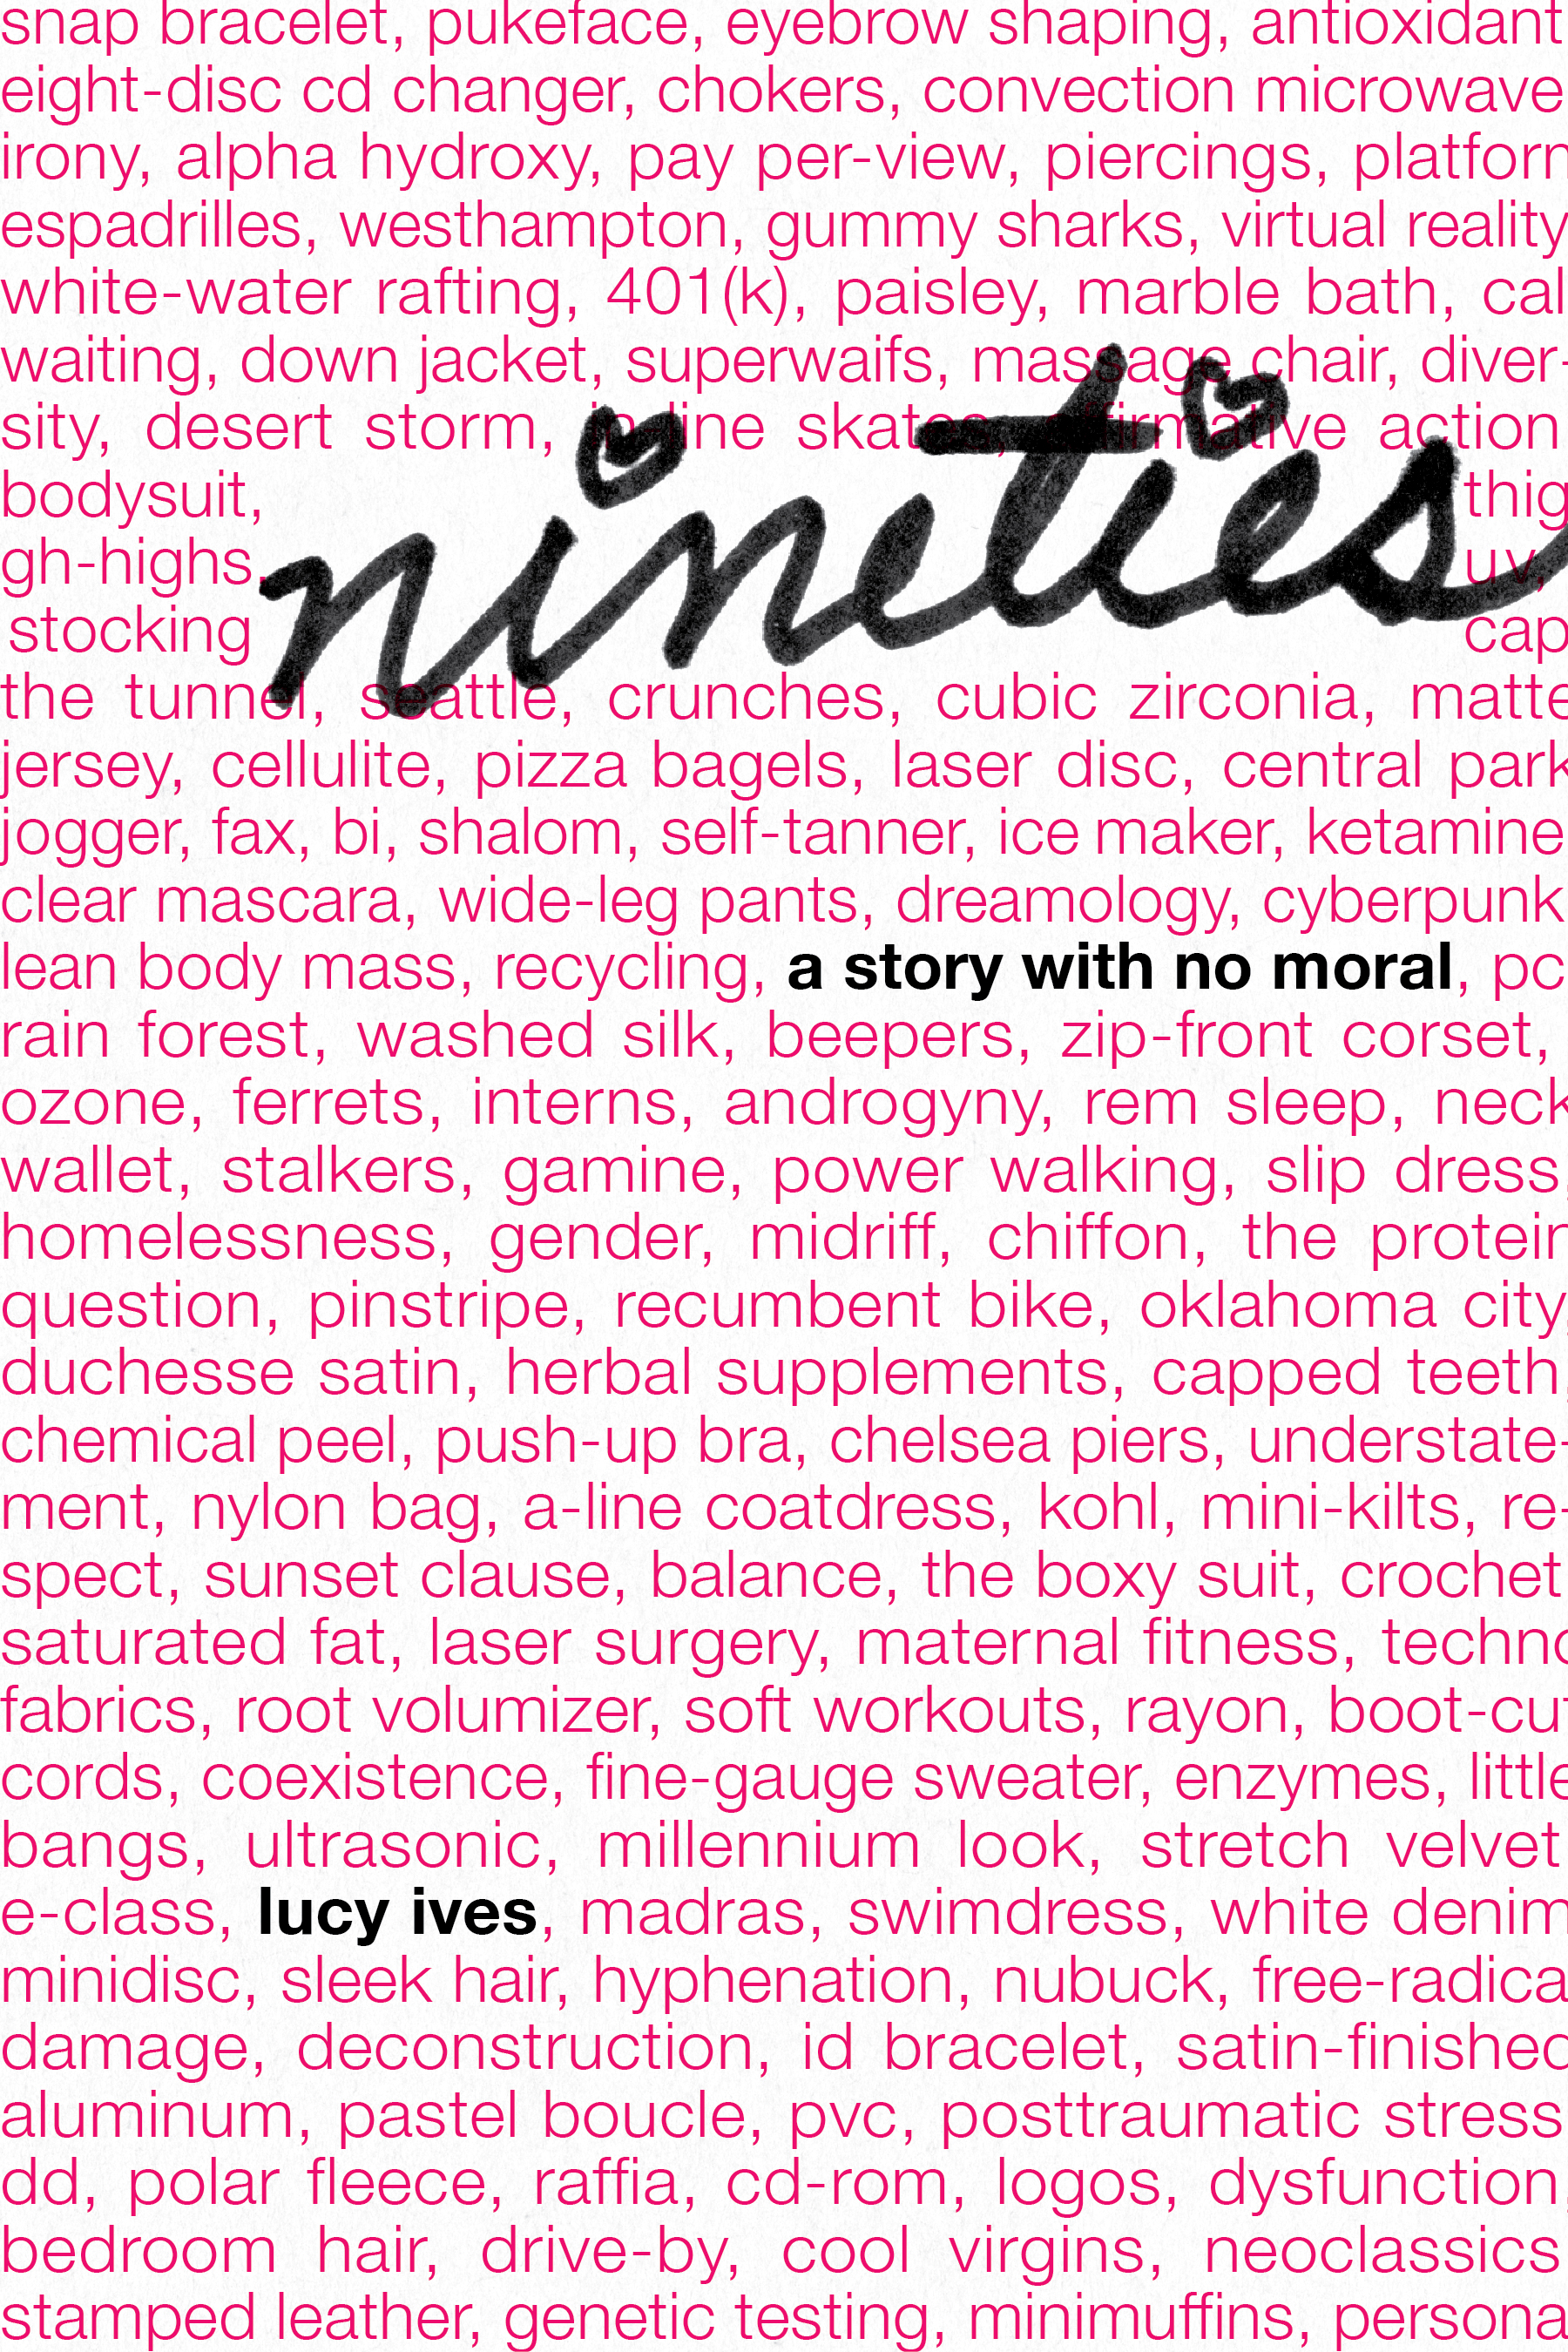  Lucy Ives’s novella  nineties &nbsp;is a portrait of teenage friends navigating Manhattan’s privileged class in an era of excess. Against the backdrop of a New York City private school during the 1990s, three girls steal a credit card for a gratuito